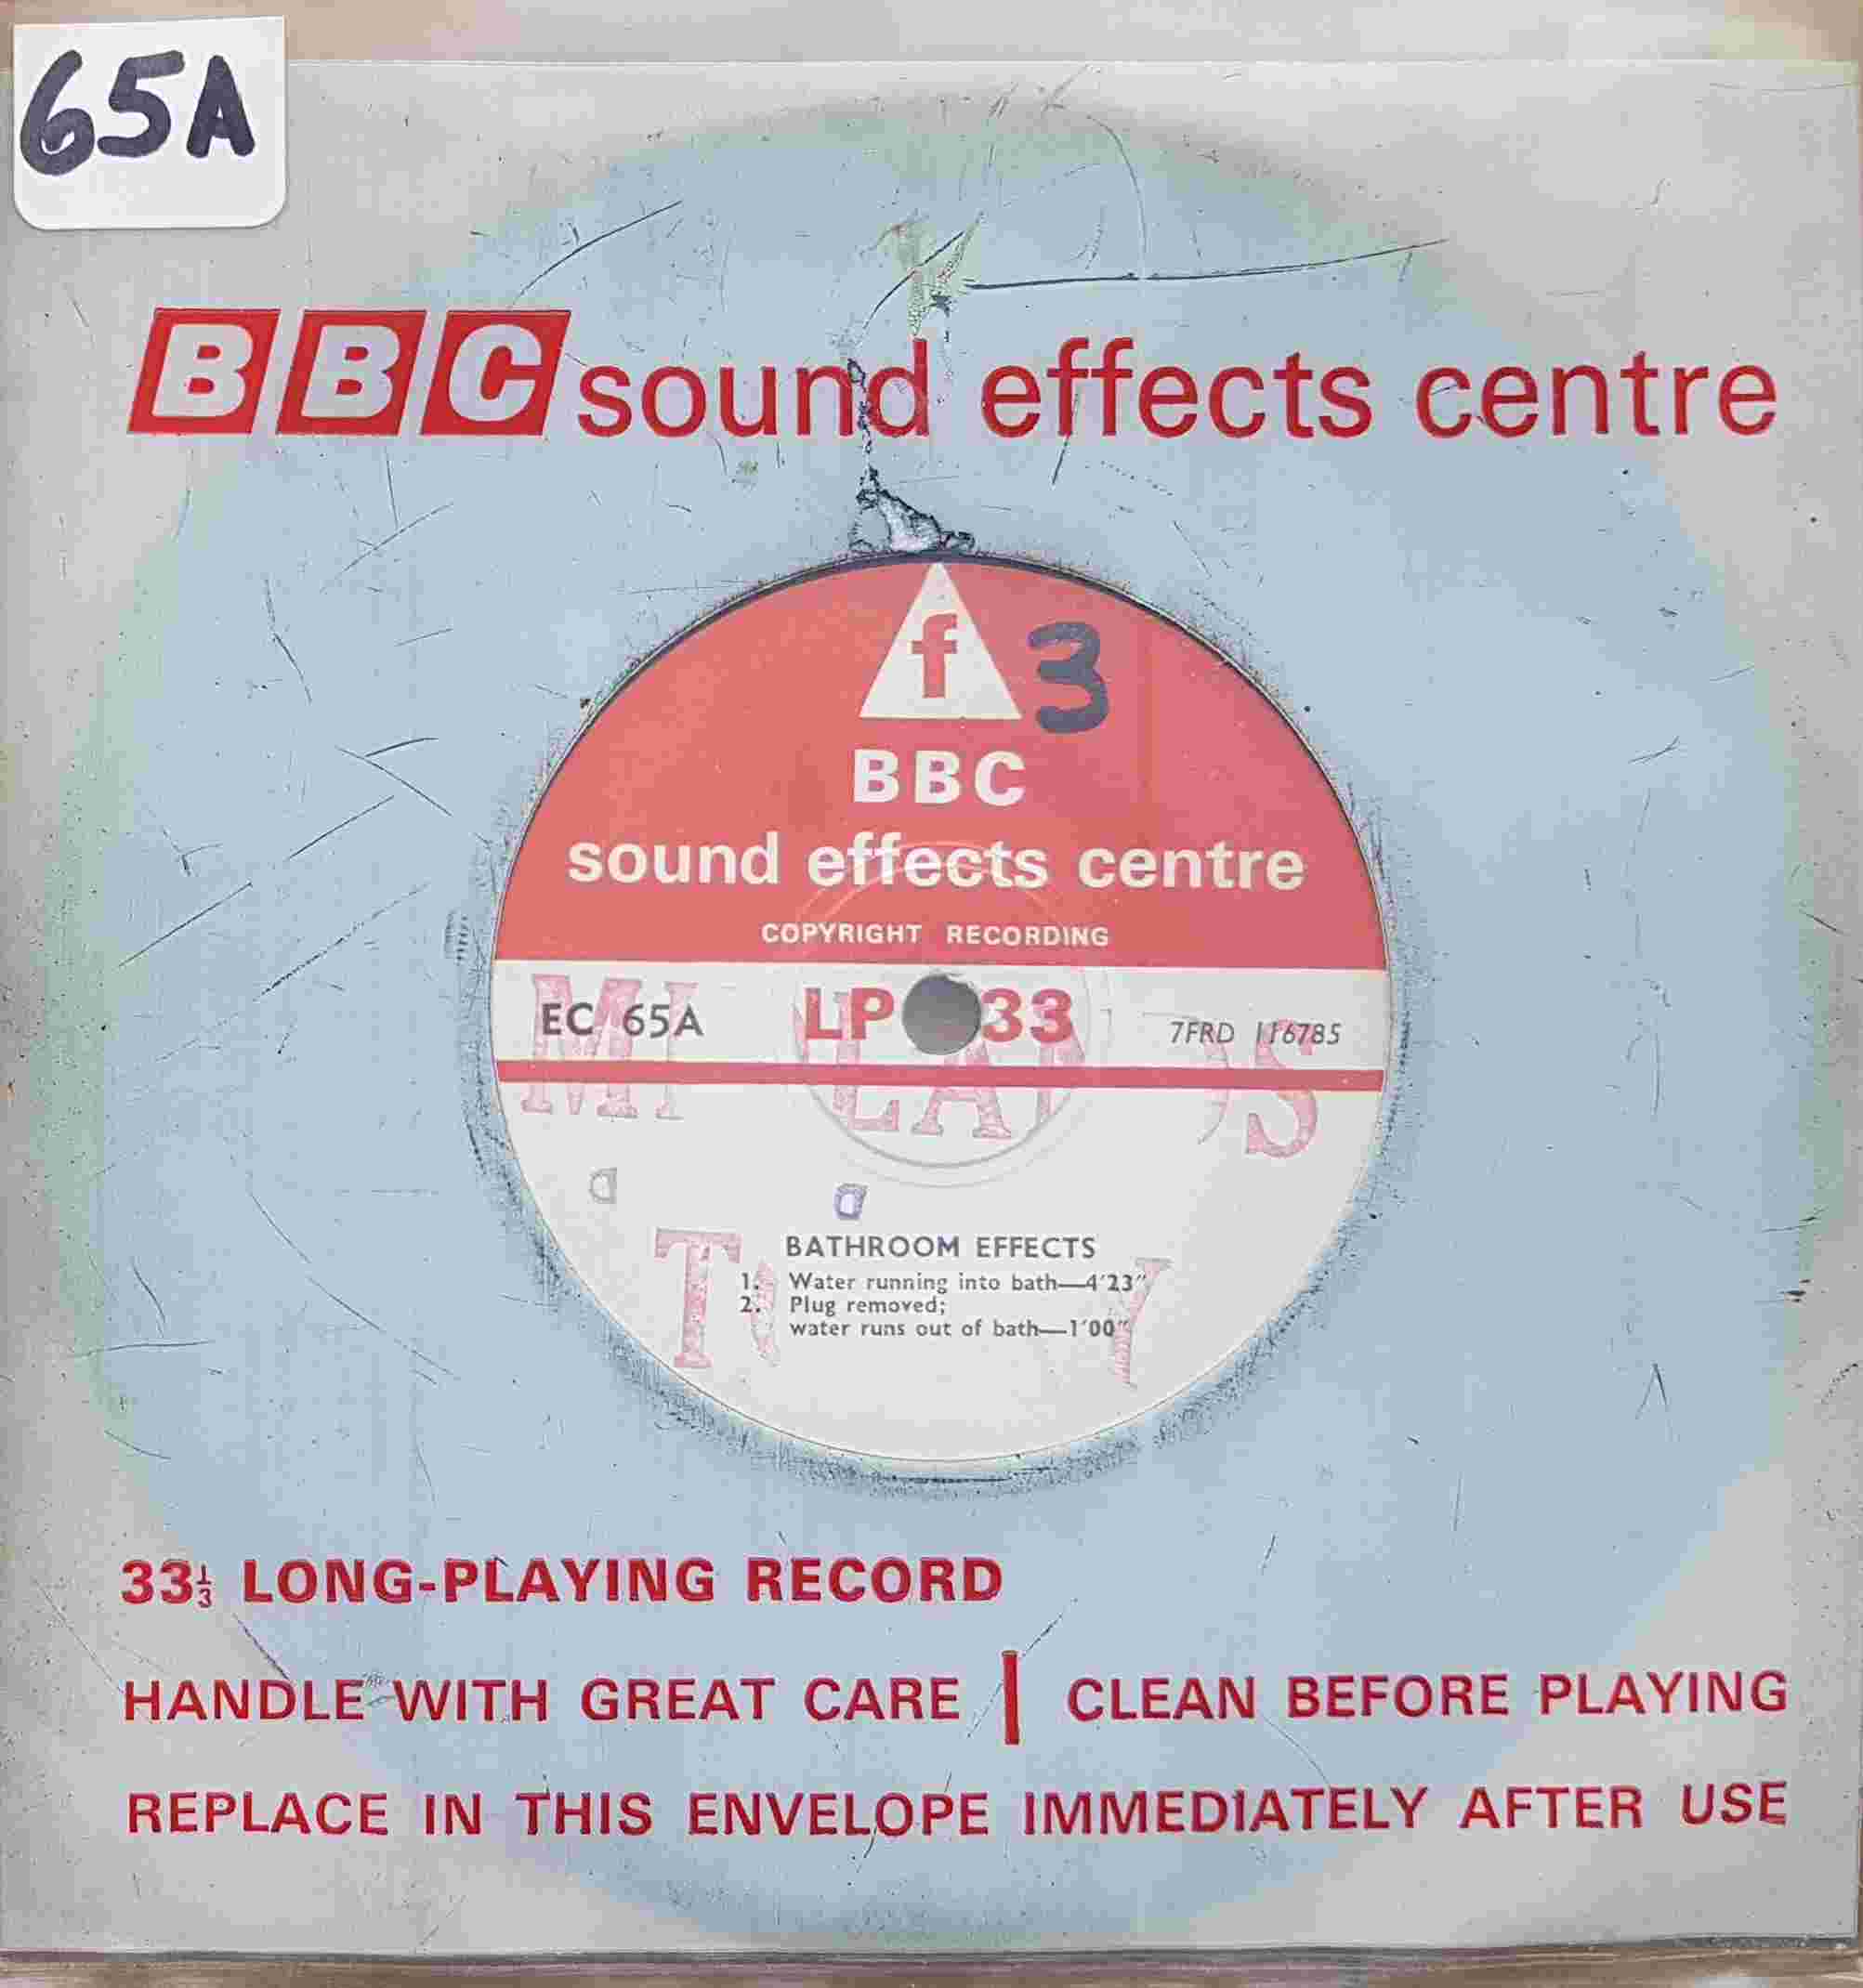 Picture of EC 65A Bathroom effects by artist Not registered from the BBC singles - Records and Tapes library